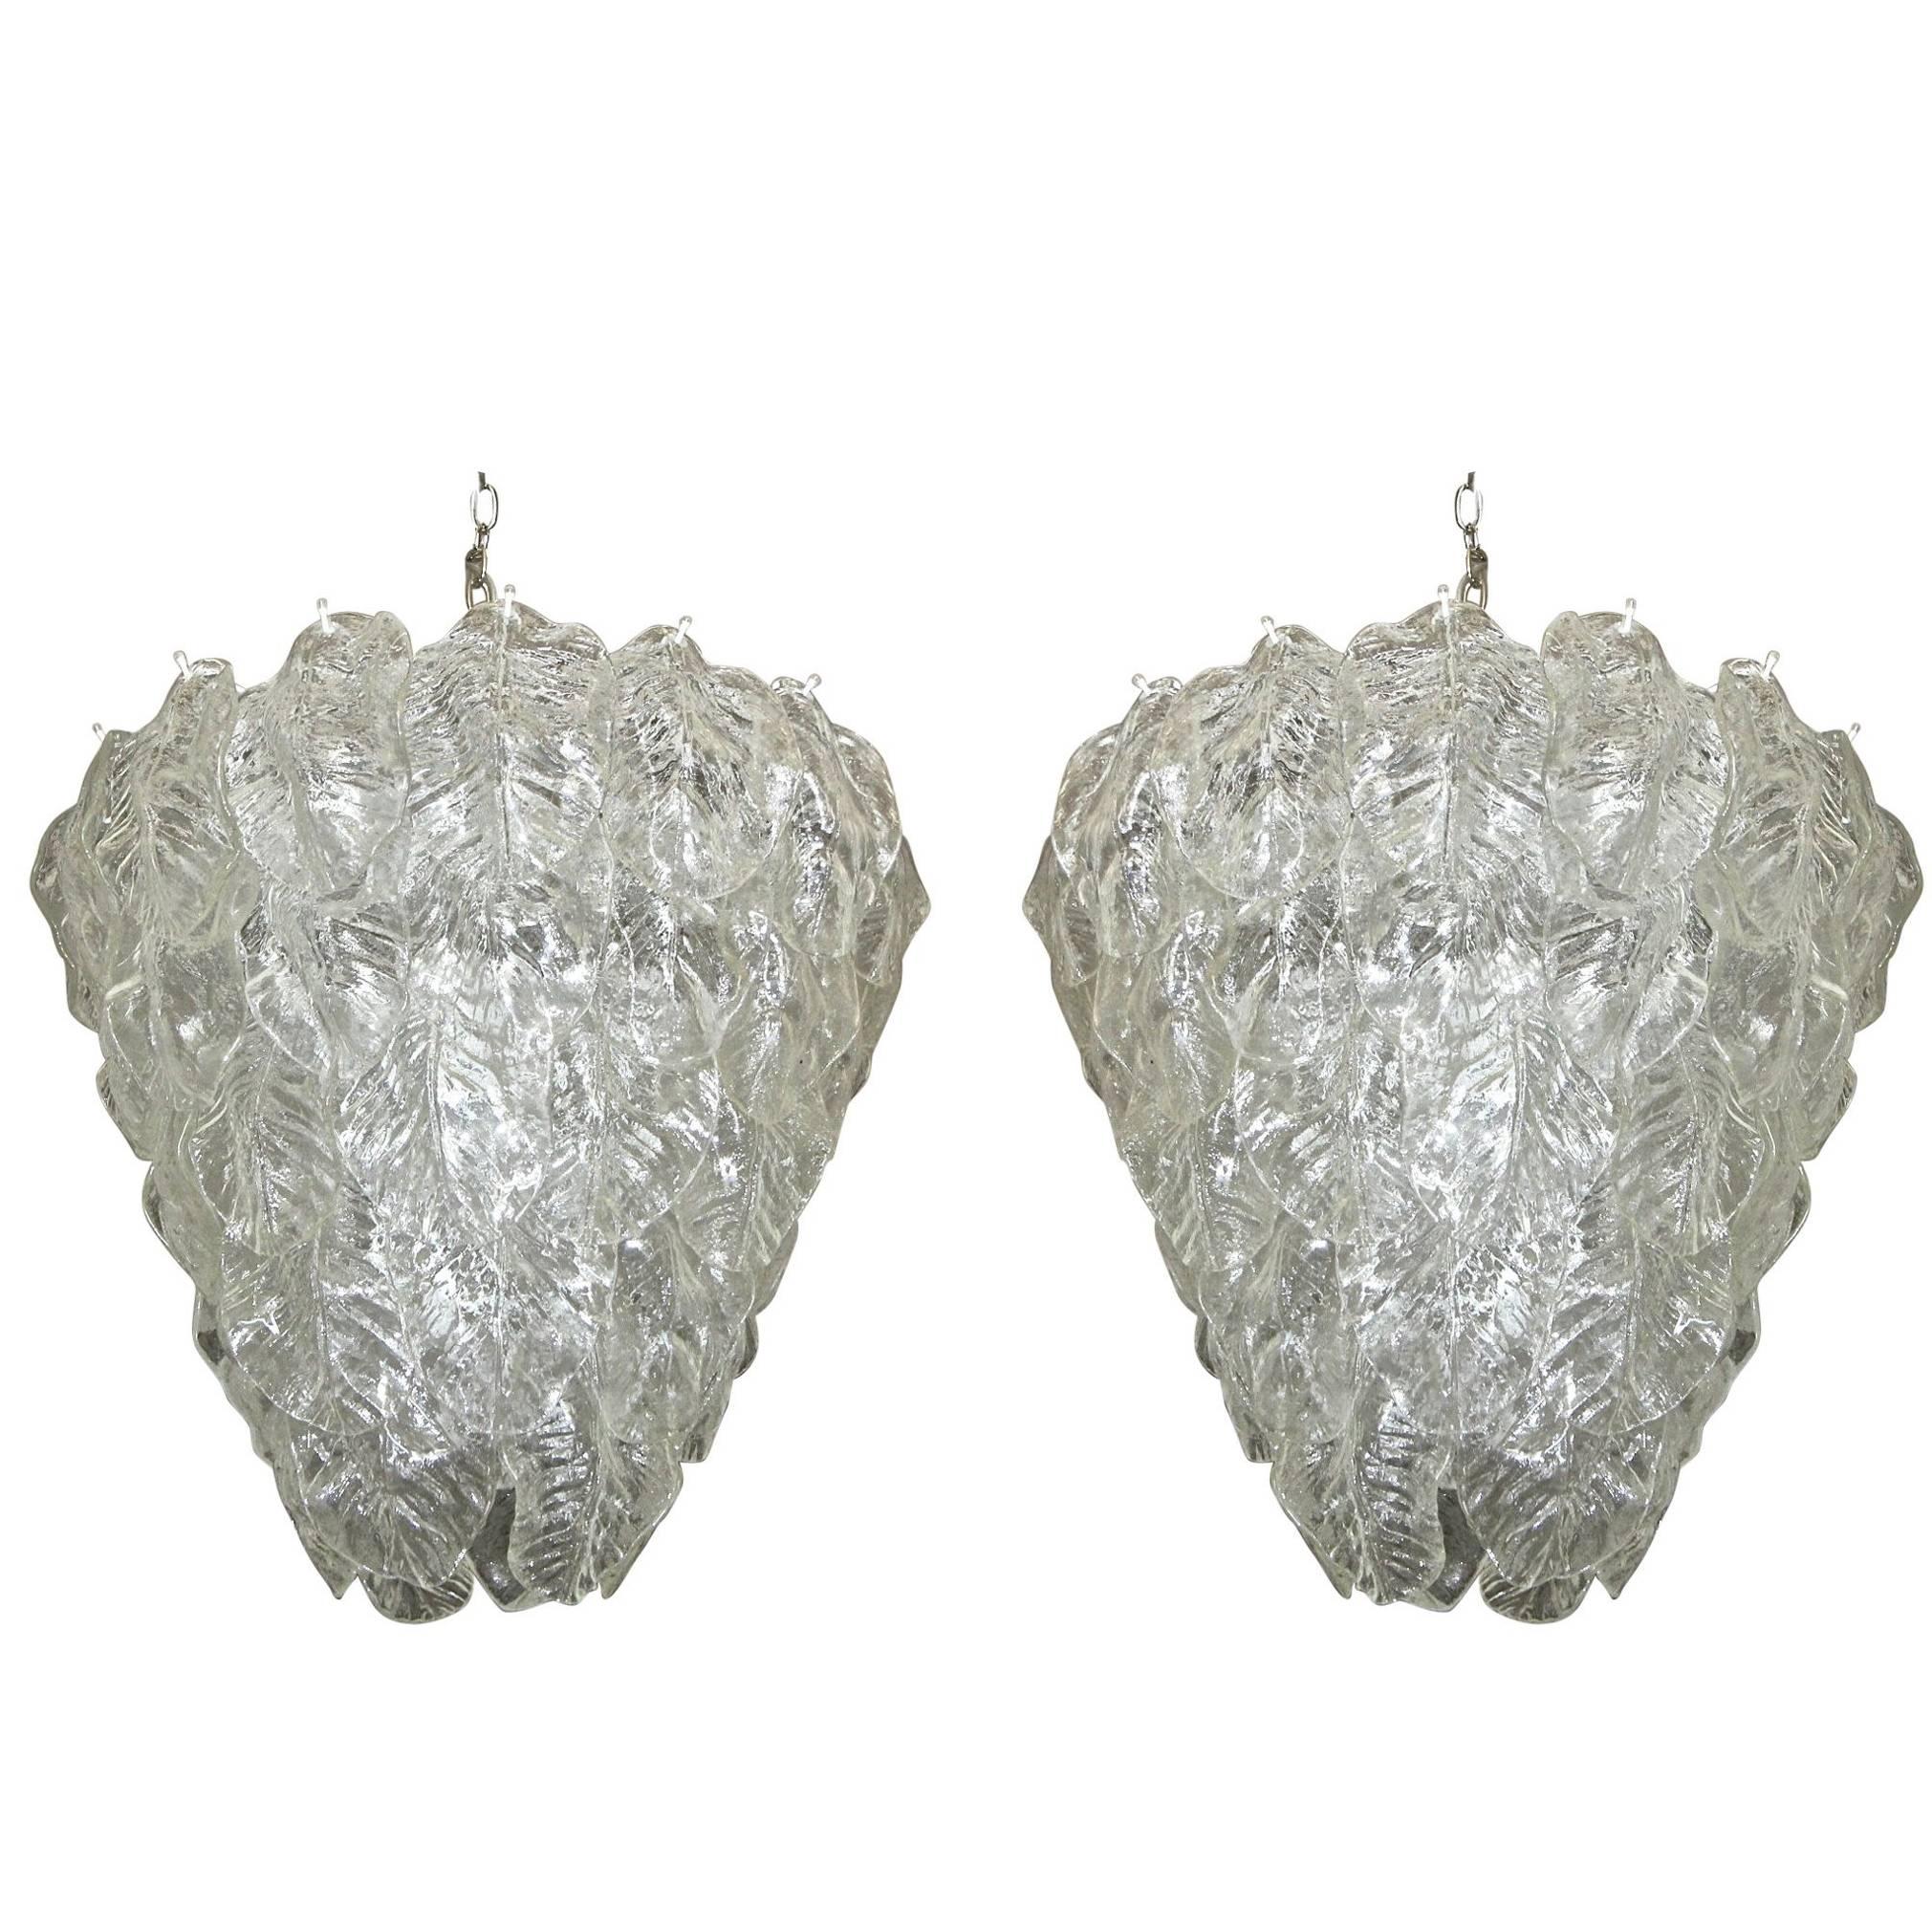 Pair Large Murano Italian Chandeliers with Glass Leaves